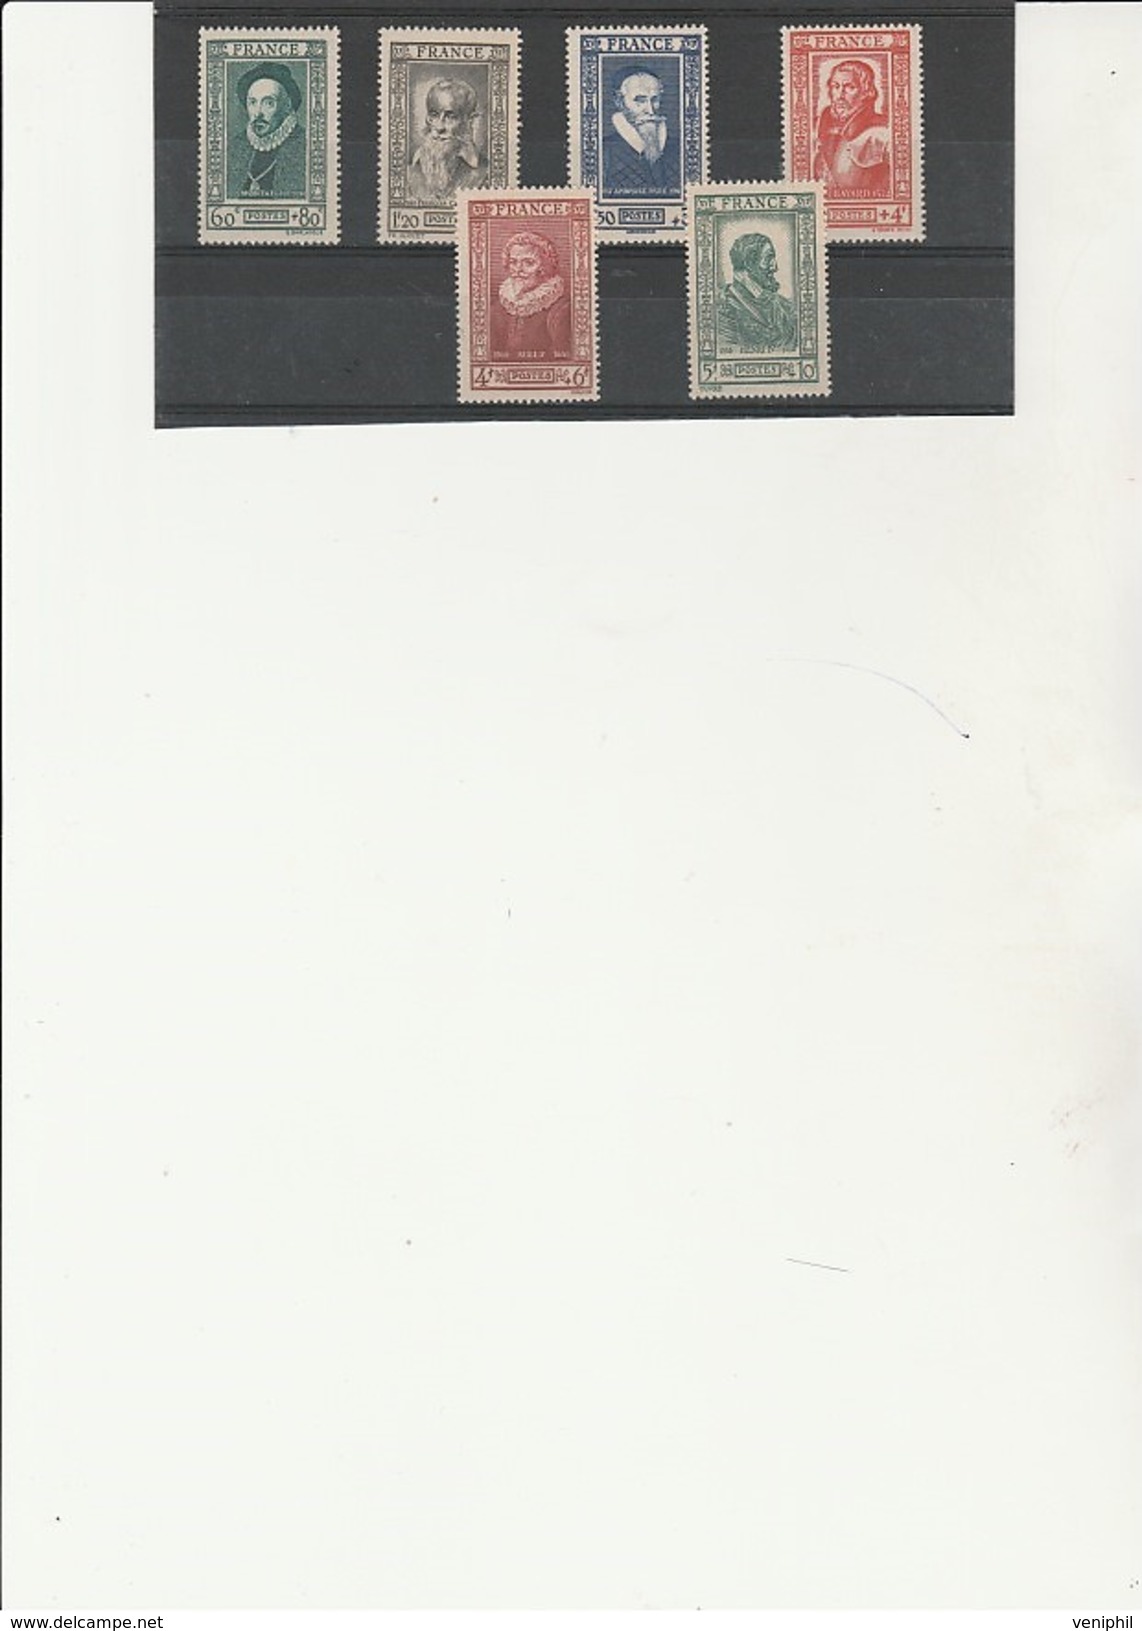 TIMBRES  CELEBRITES - N° 587 A 592 NEUF SANS CHARNIERE -ANNEE 1943 - COTE : 15 € - Unused Stamps